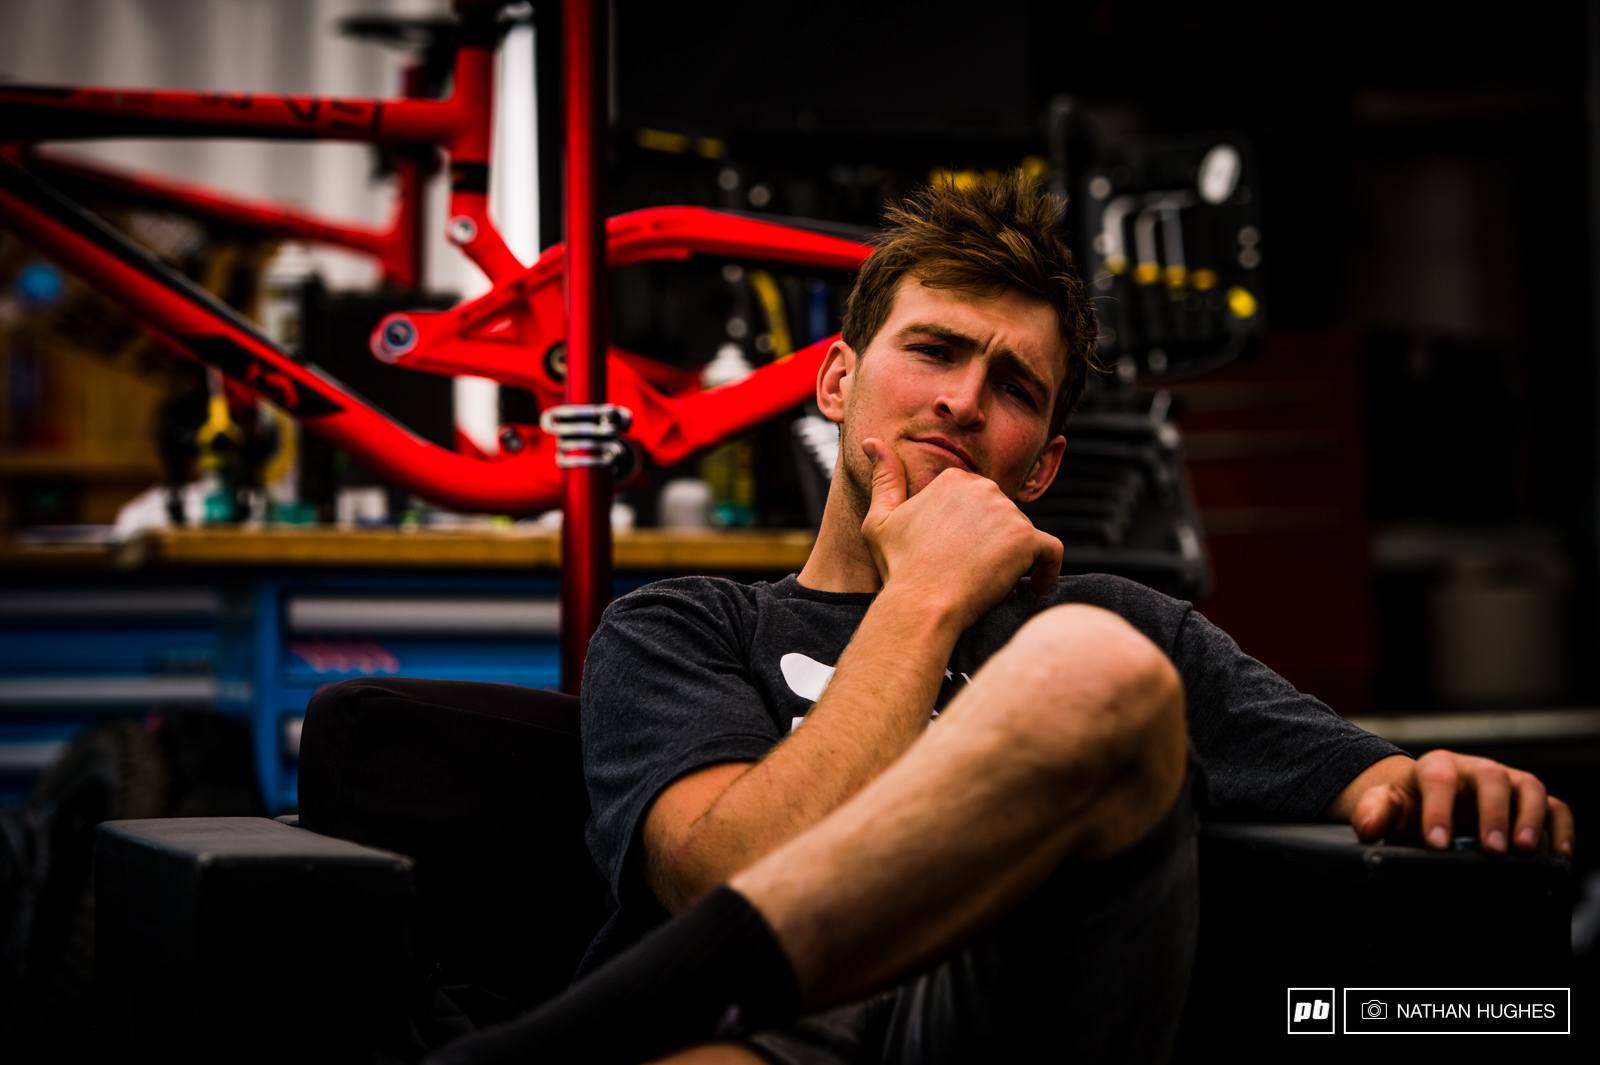 Introducing Pinkbike's newly appointed director of Instagram for this very special weekend unfolding.